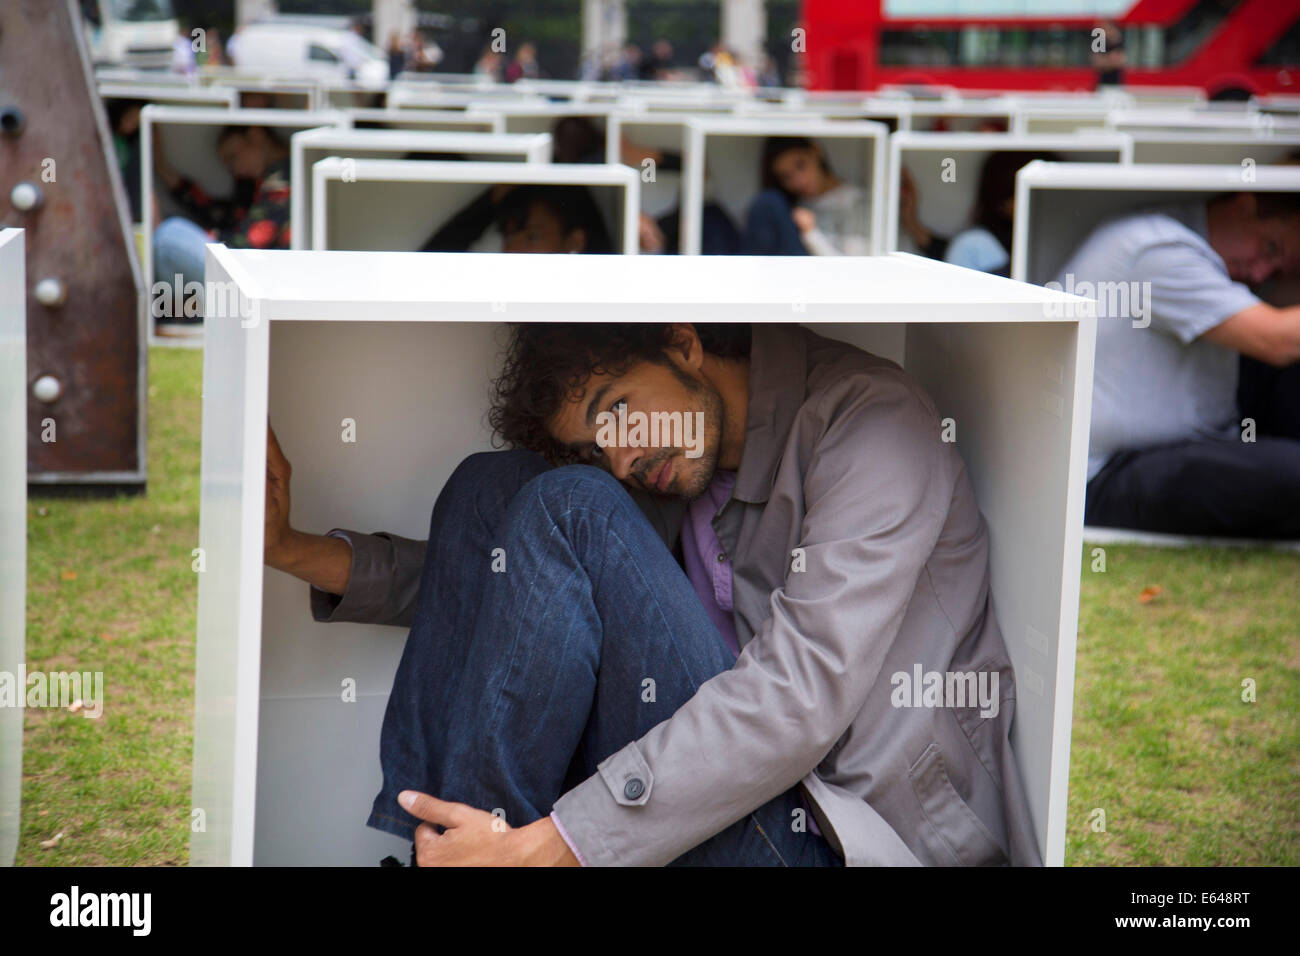 London, UK, Thursday 14th August 2014. In Parliament Square, 150 men, women and children are squashed inside boxes for an Oxfam stunt to illustrate the conditions faced by the people in Gaza who are trapped by the blockade. Credit:  Michael Kemp/Alamy Live News Stock Photo